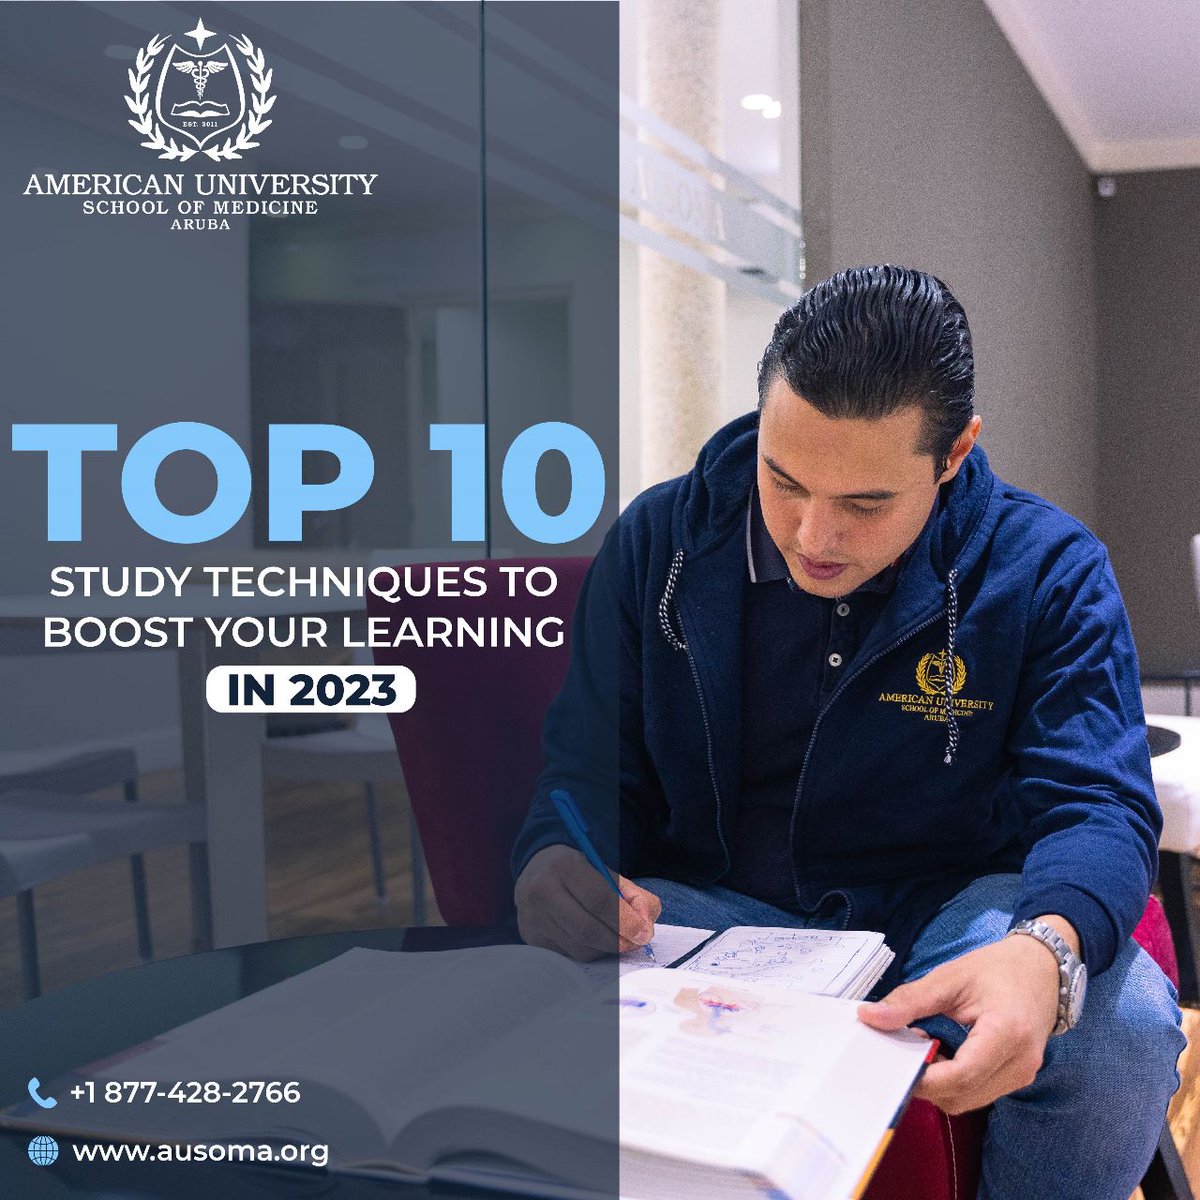 Do you want to learn new techniques which can boost your learning? 
There are a number of tips and techniques you can learn to maximize your efficiency. 

Visit our blog to read more: hubs.la/Q01yLQCD0

#AUSOMA #medicalschool #medicine #medicalstudent #medicaltechniques